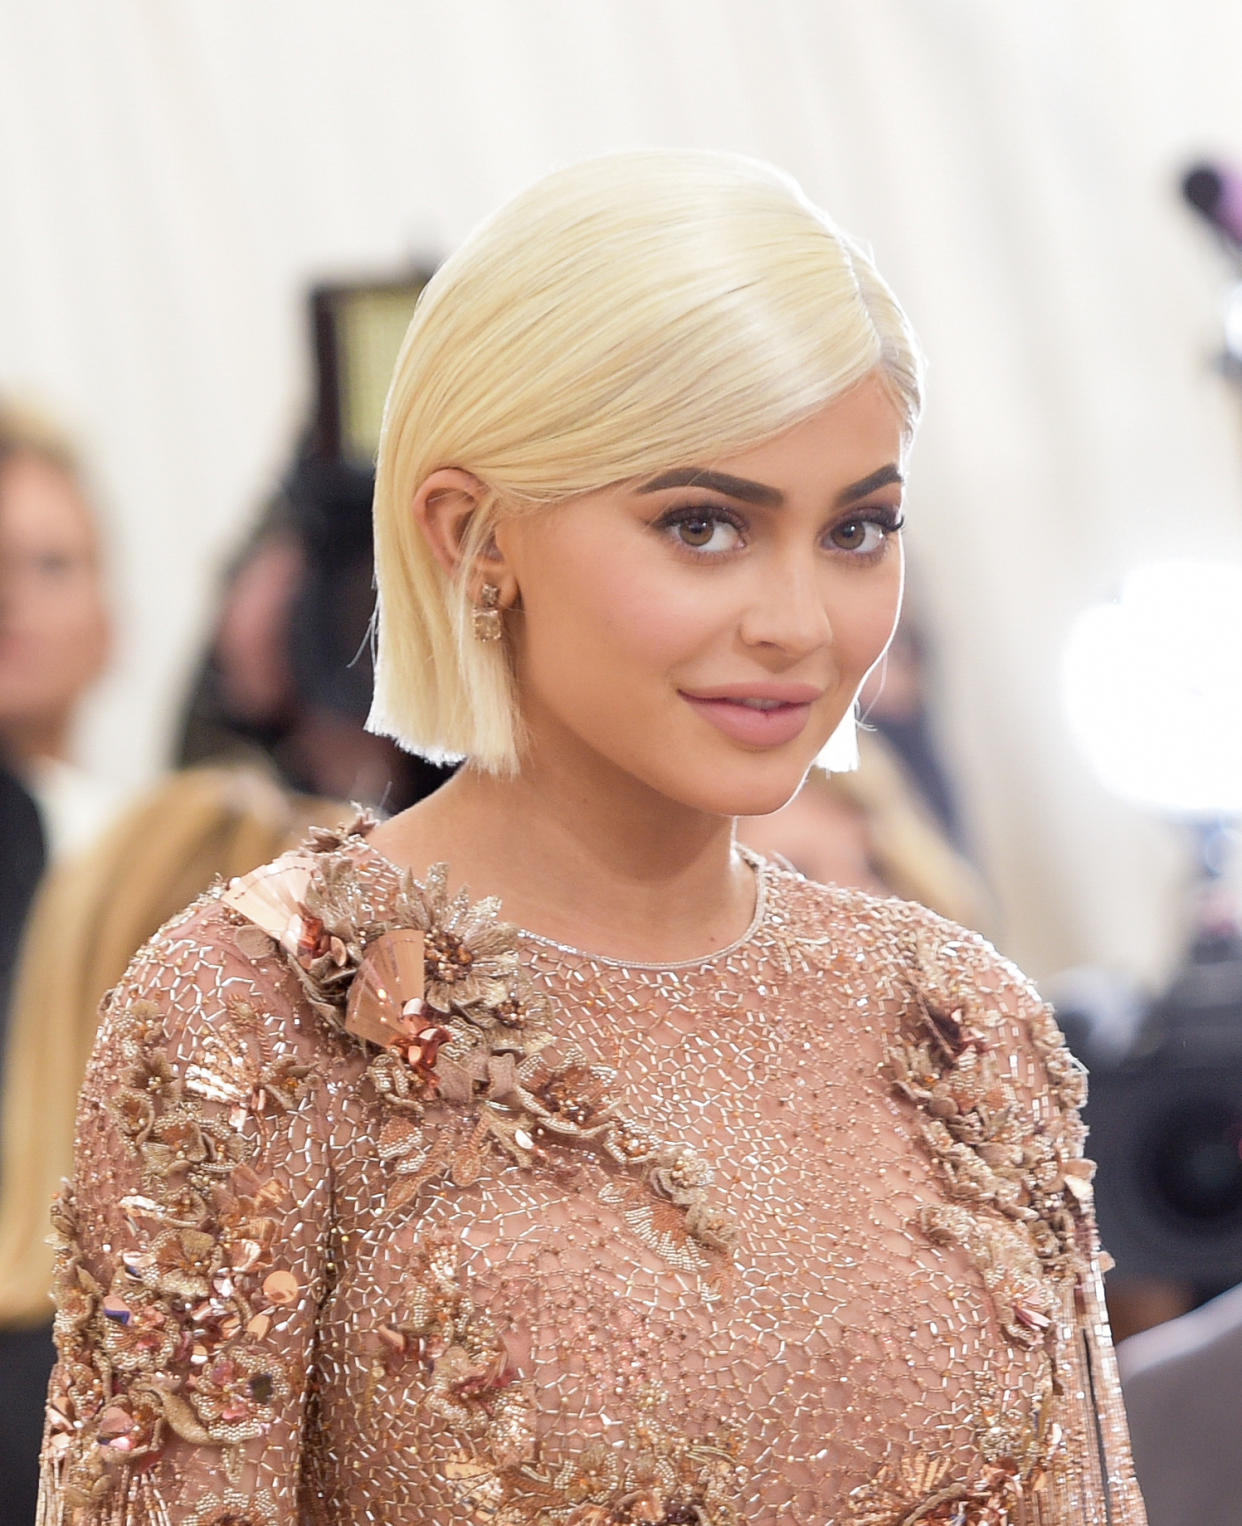 Kylie Jenner drops a not-so-subtle hint about her reported pregnancy. (Photo: Getty Images)